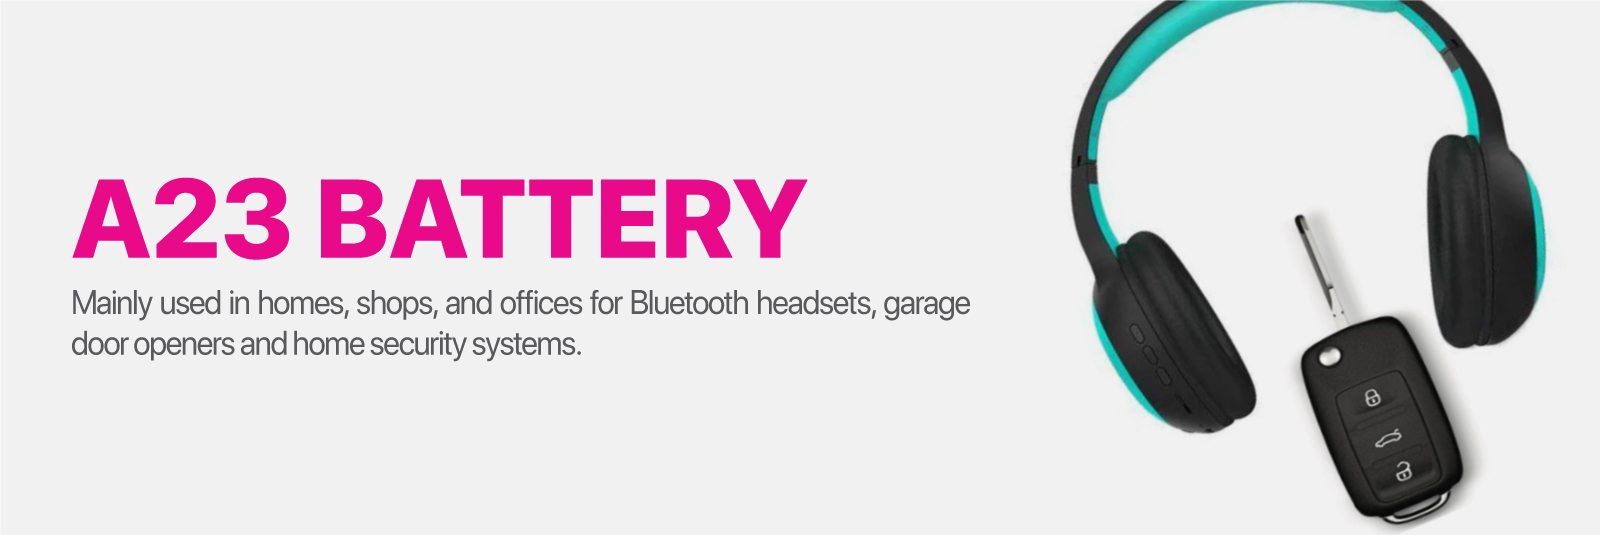 A23 Battery Mainly used in homes, shops and offices for Bluetooth headsets, garage door openers and home security systems.